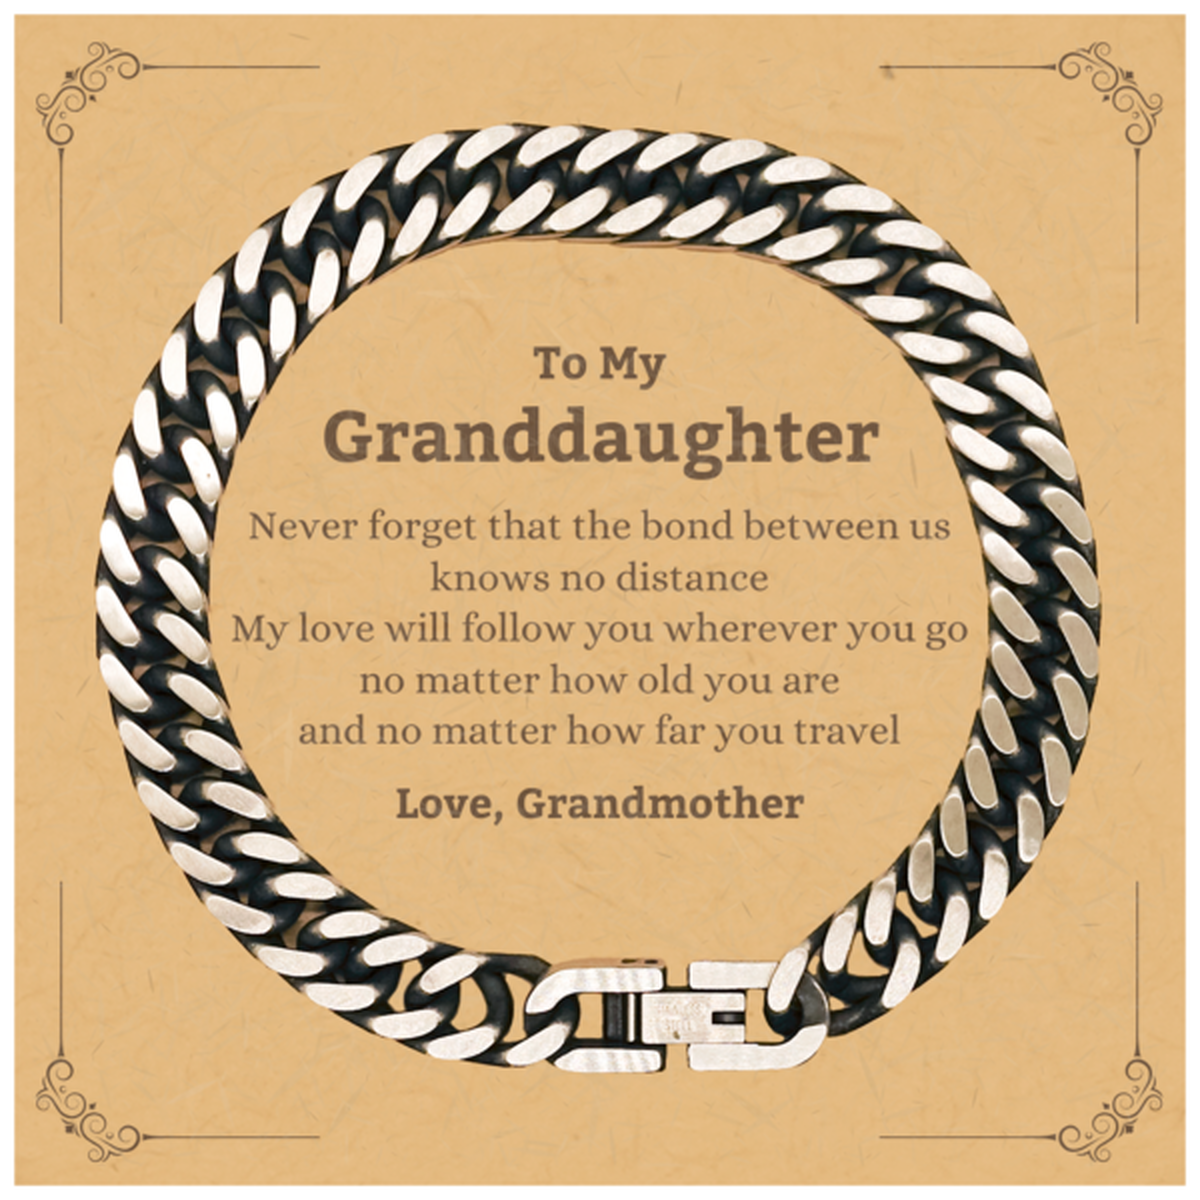 Granddaughter Birthday Gifts from Grandmother, Adjustable Cuban Link Chain Bracelet for Granddaughter Christmas Graduation Unique Gifts Granddaughter Never forget that the bond between us knows no distance. Love, Grandmother